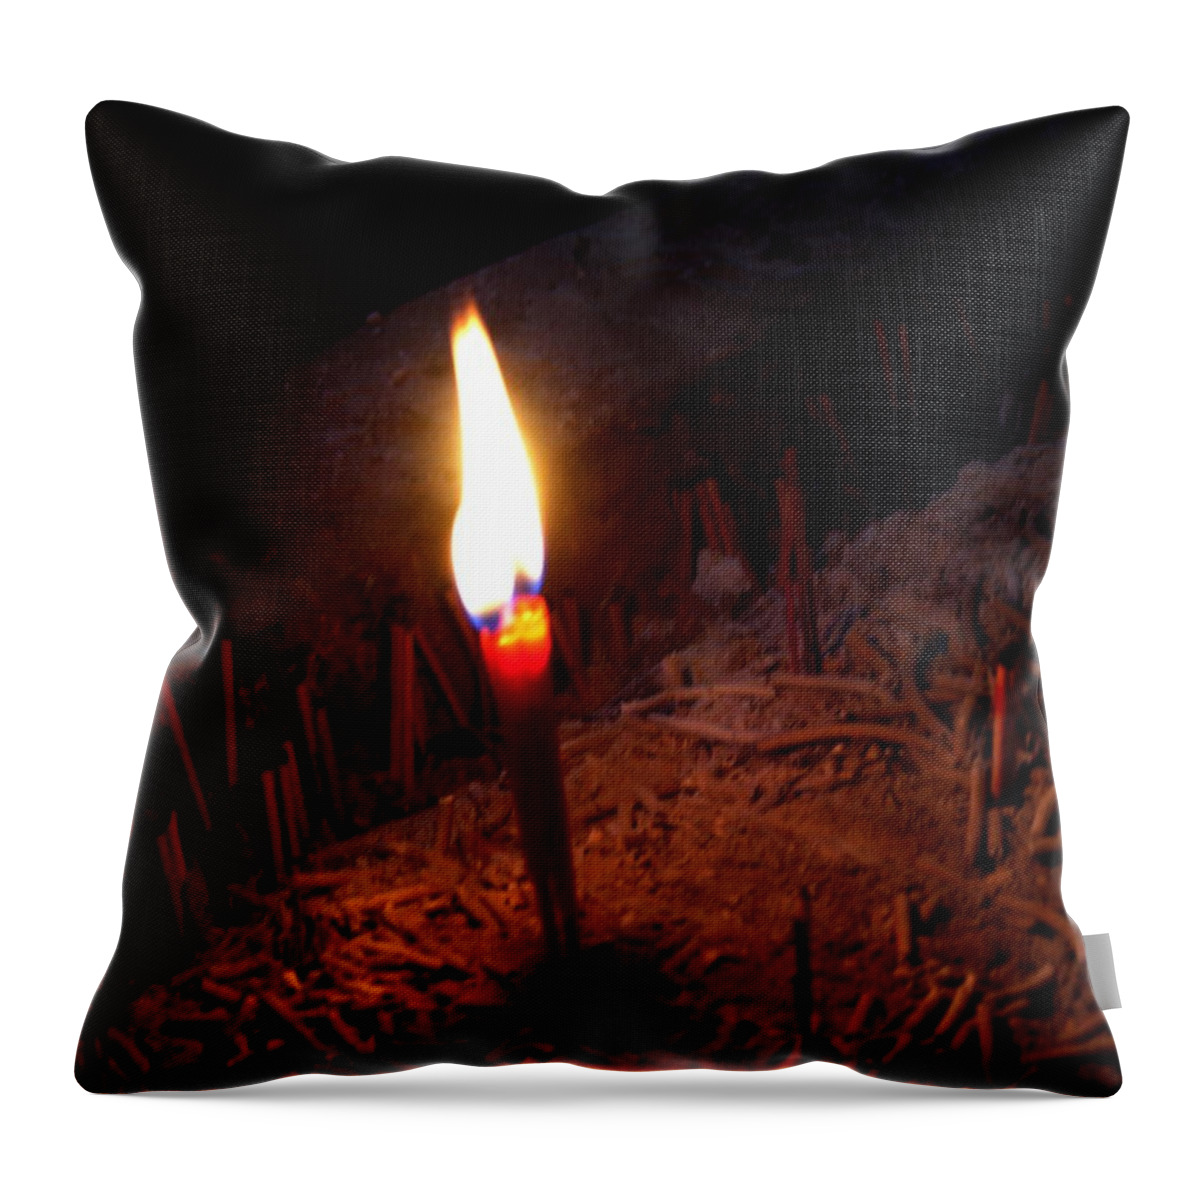 Meditation Art Throw Pillow featuring the photograph Meditation art - Temple - Qing Dynasty by Jacqueline M Lewis